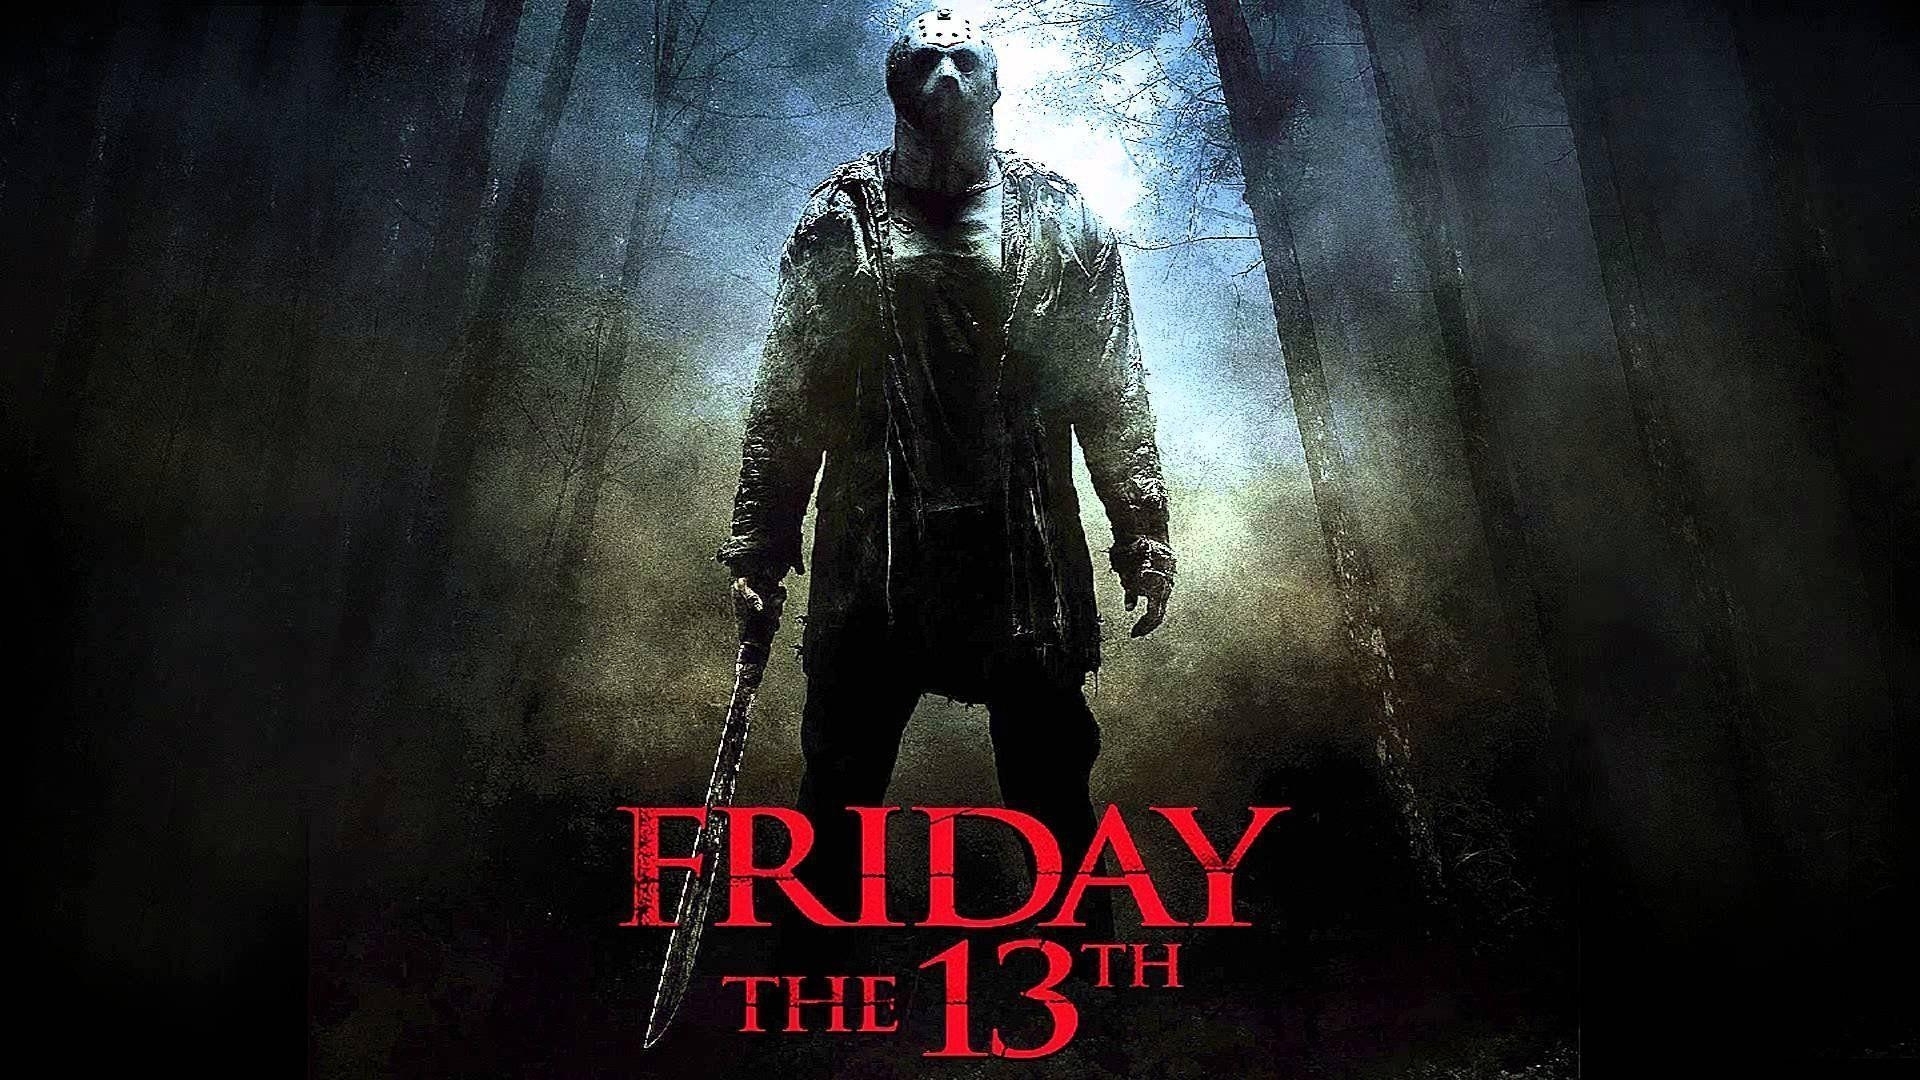 10 Top Jason Friday The 13Th Wallpaper FULL HD 1920×1080 For PC Background